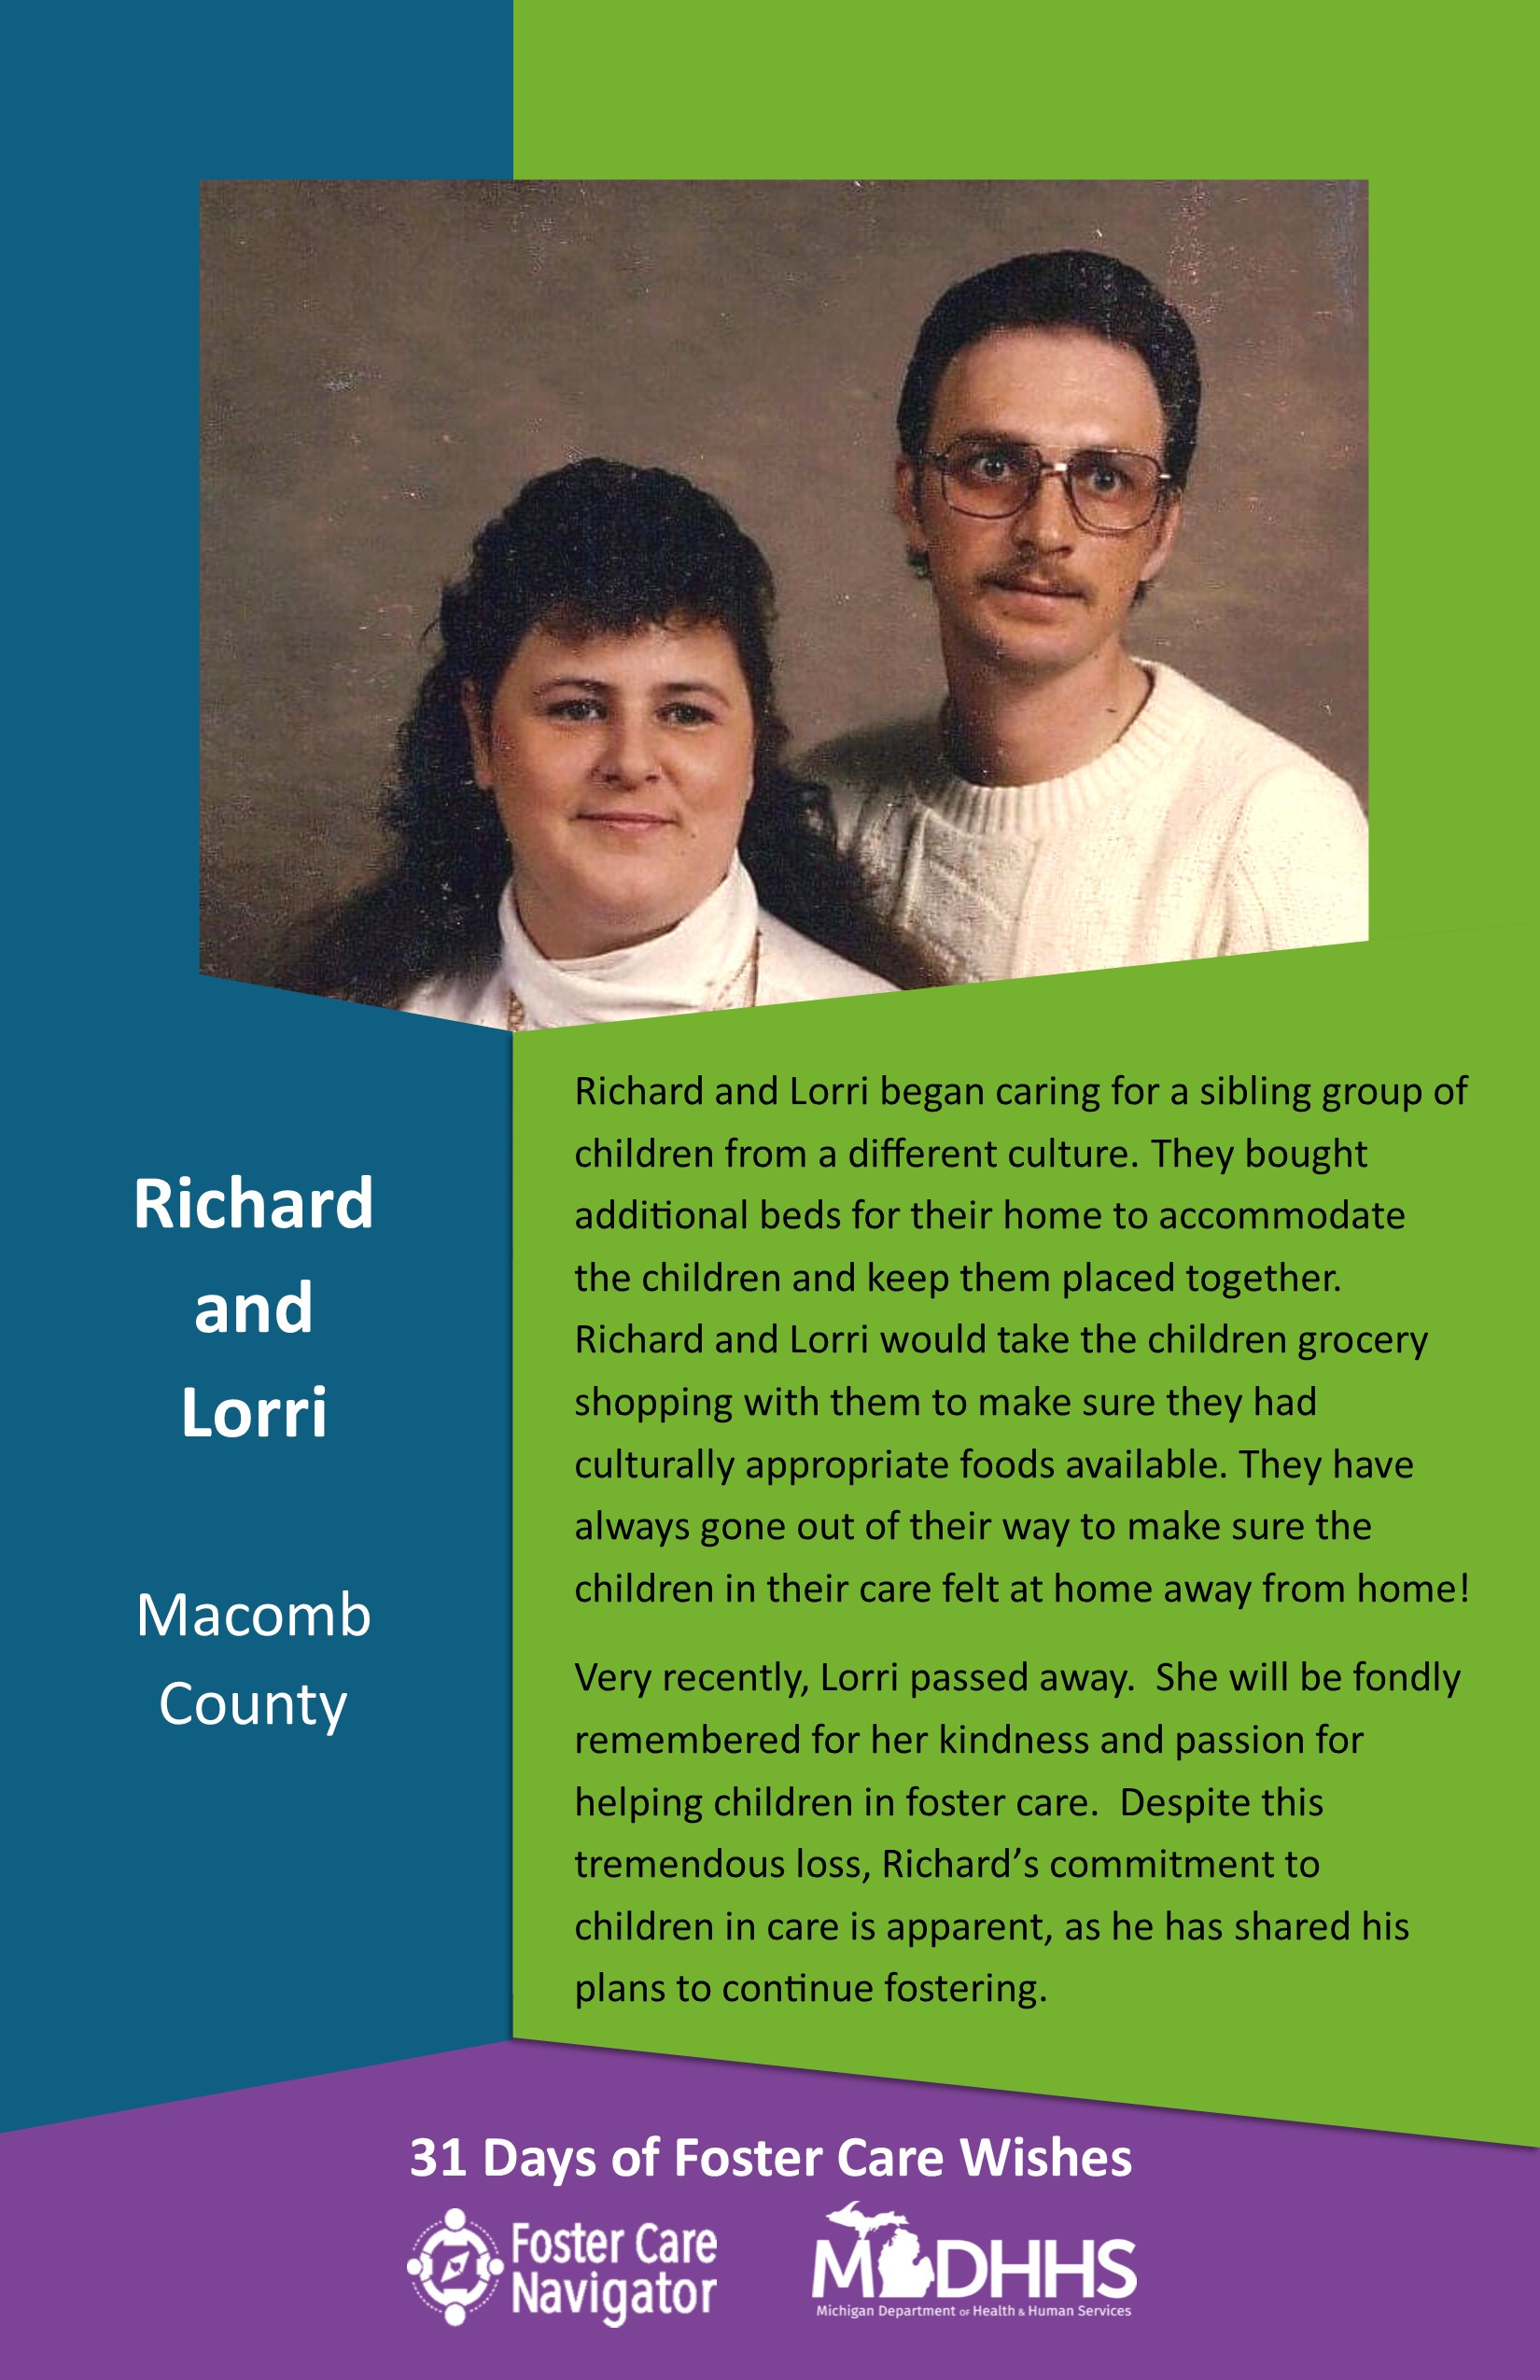 This full page feature includes all of the text listed in the body of this blog post as well as a photo of Richard and Lorri. The background is blue on the left, green on the right, and purple at the bottom of the page where the logos are located.